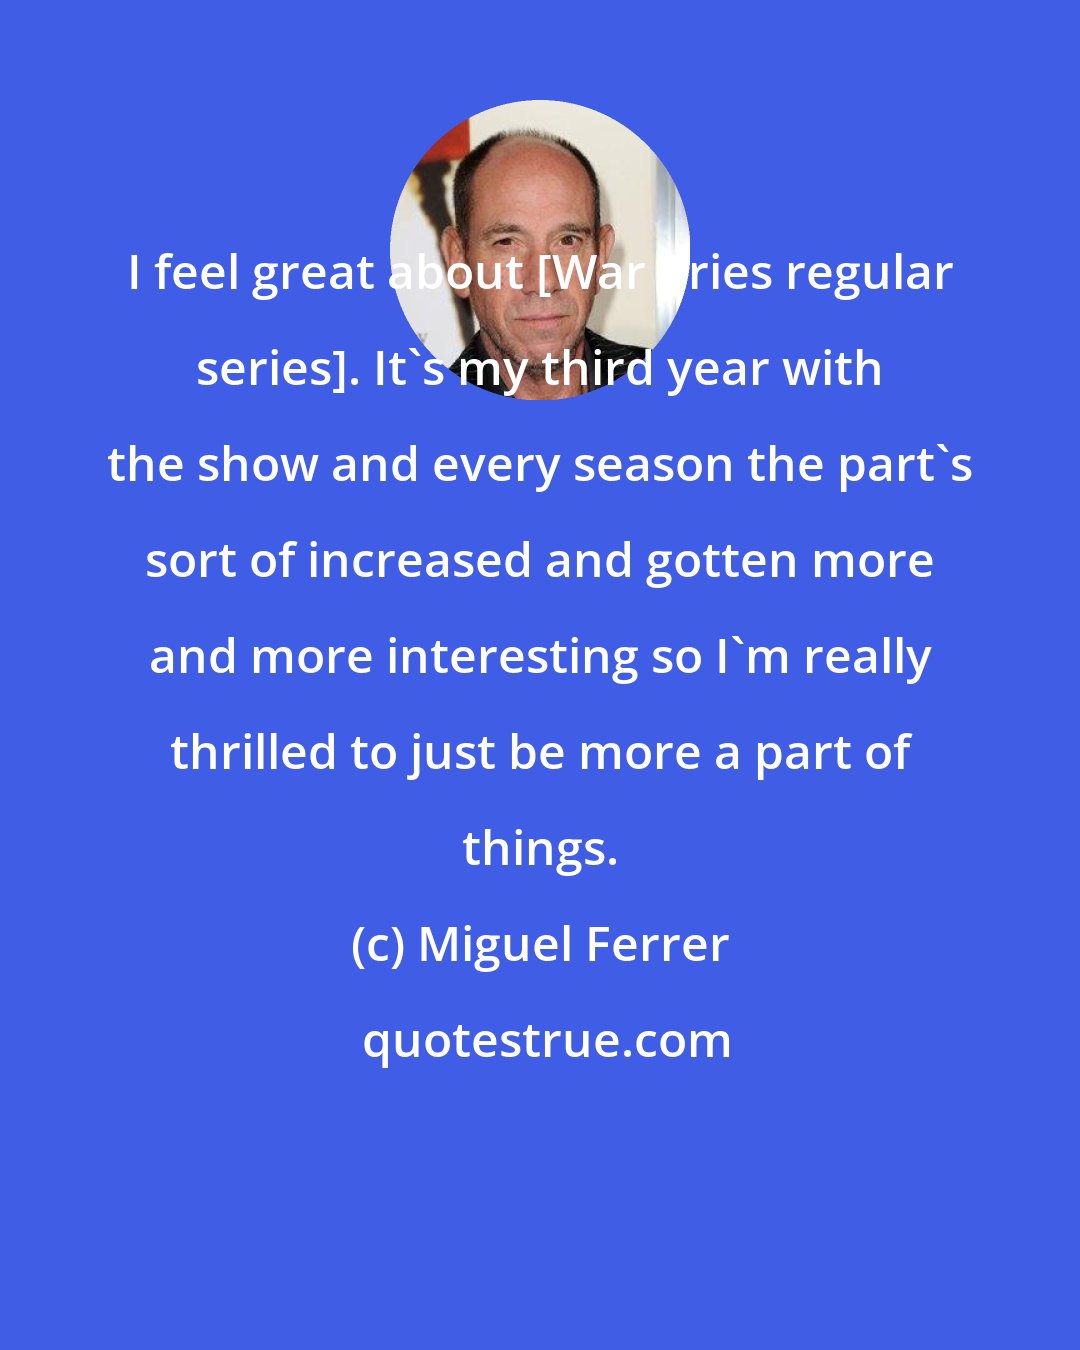 Miguel Ferrer: I feel great about [War Cries regular series]. It's my third year with the show and every season the part's sort of increased and gotten more and more interesting so I'm really thrilled to just be more a part of things.